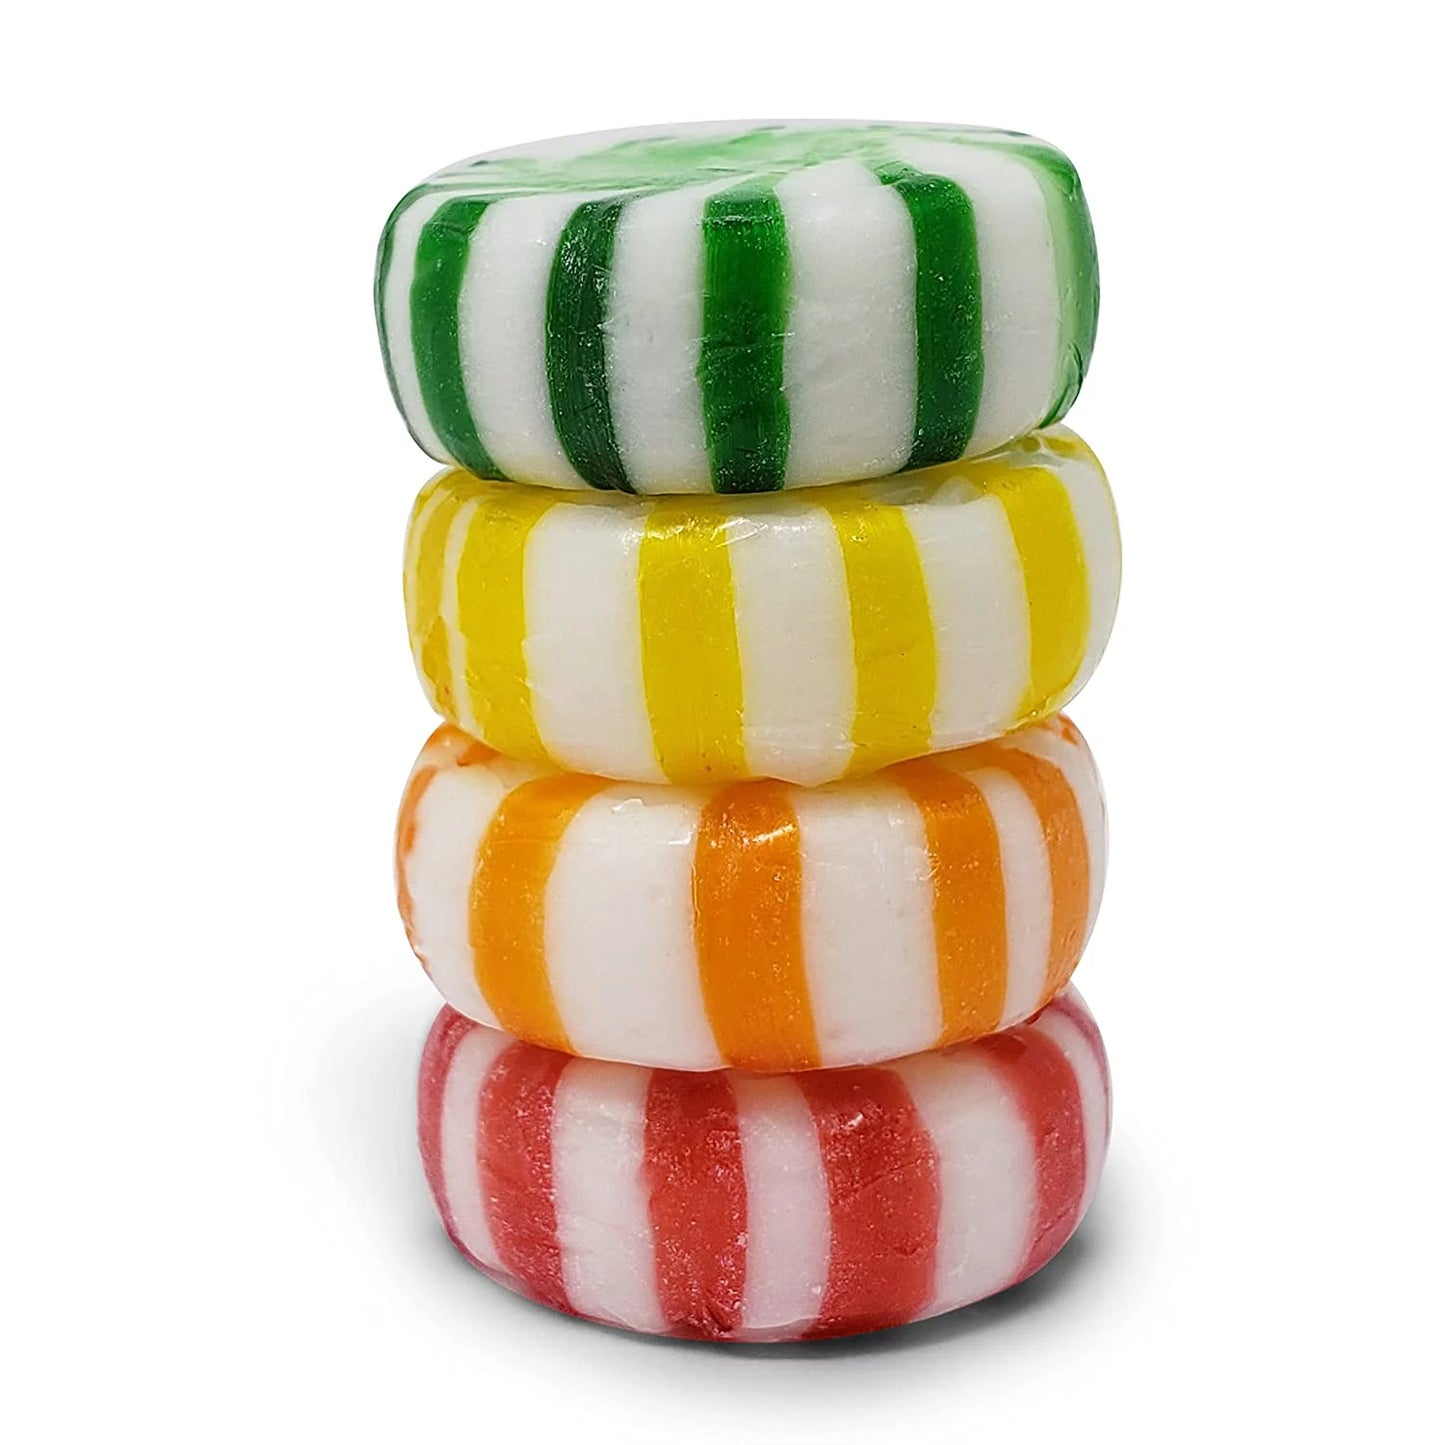 Co. Old Fashioned Hard Candy Flavors, Bulk - Individually Wrapped Nostalgia Candies Variety for Parties, Snacking, Women, Men, Girls and Boys, 64 Oz (Assorted Fruit Buttons)